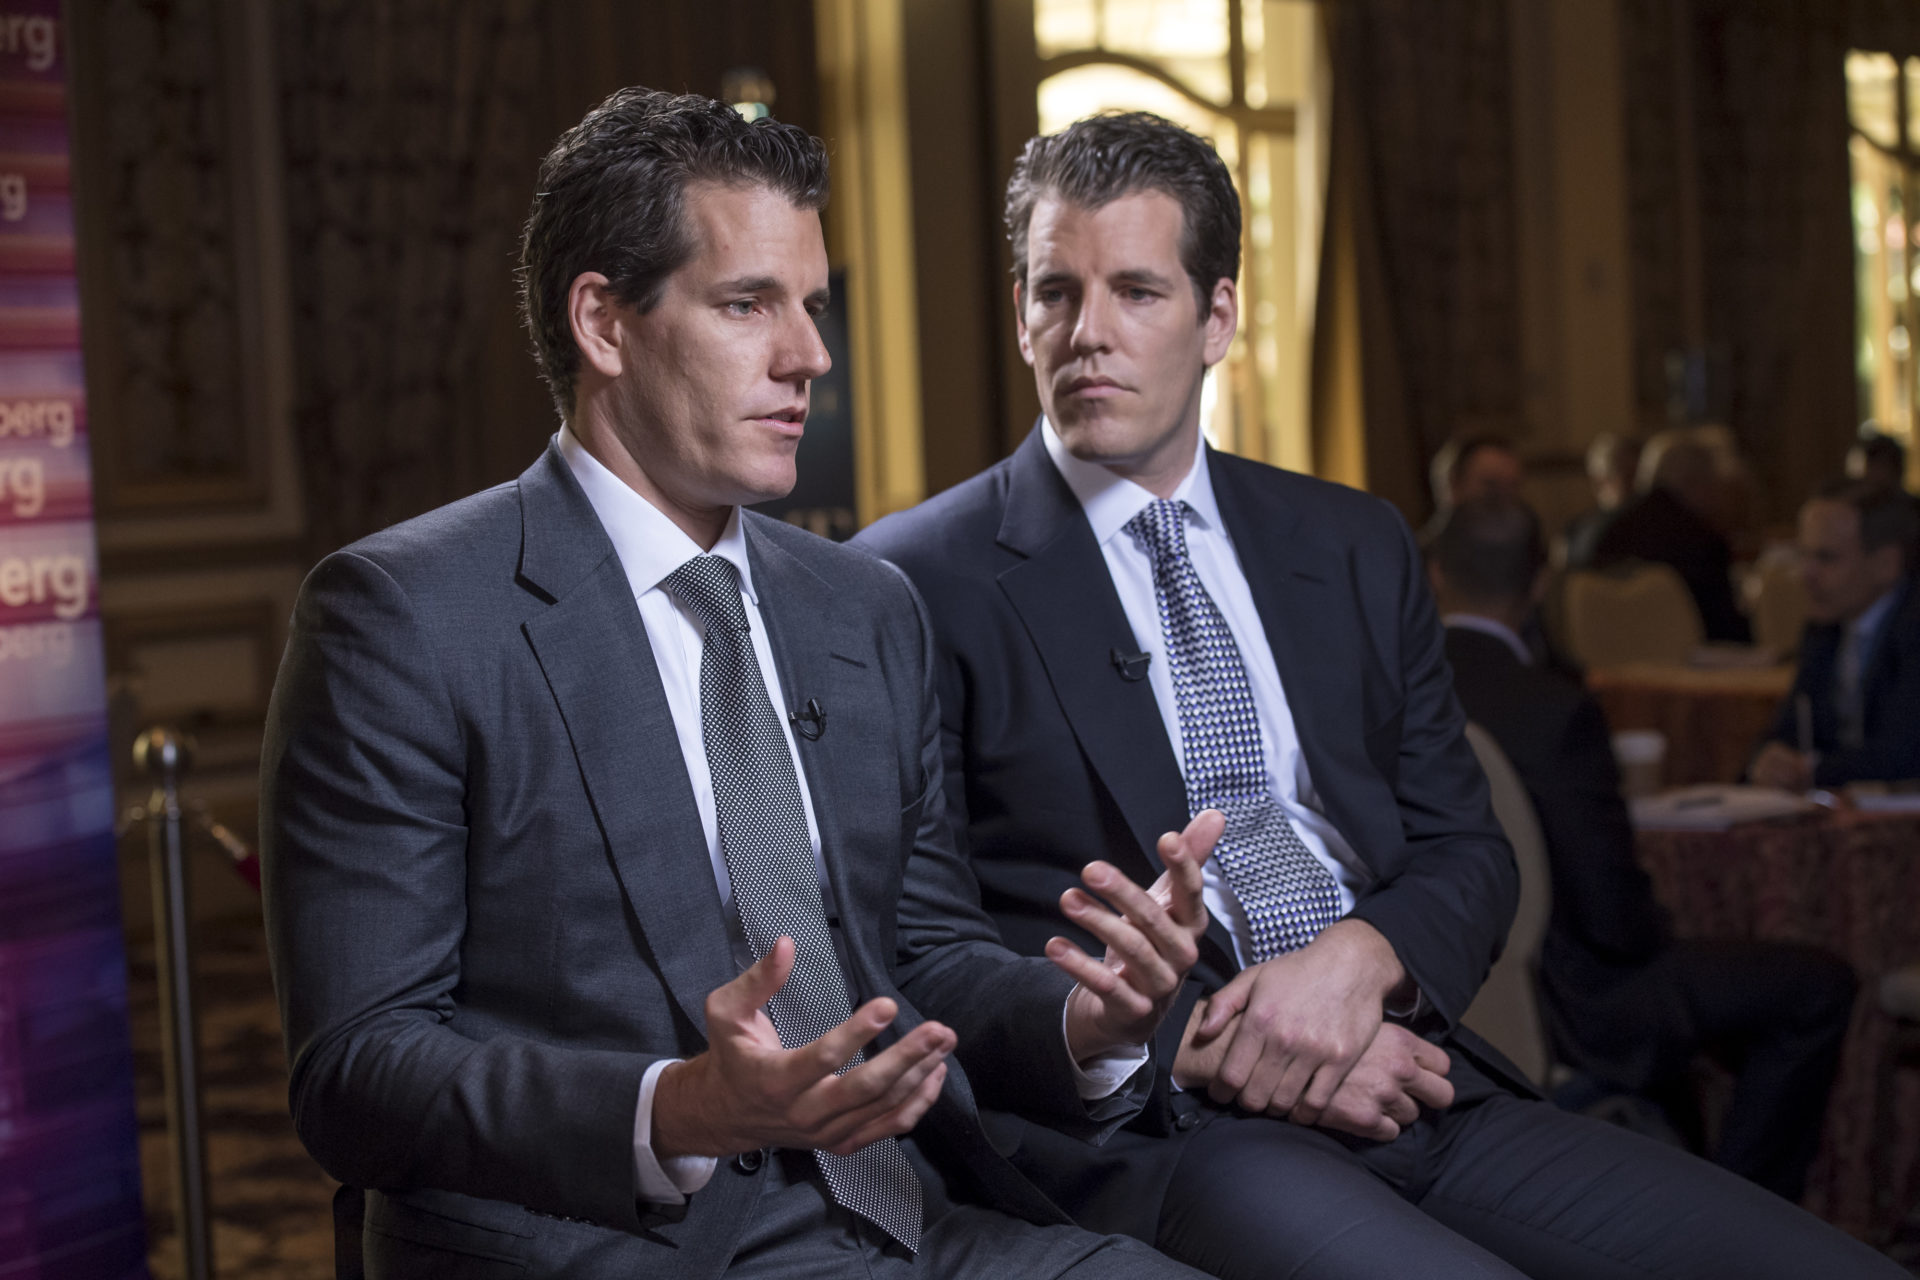  winklevoss etf bitcoin btc different rejected one 